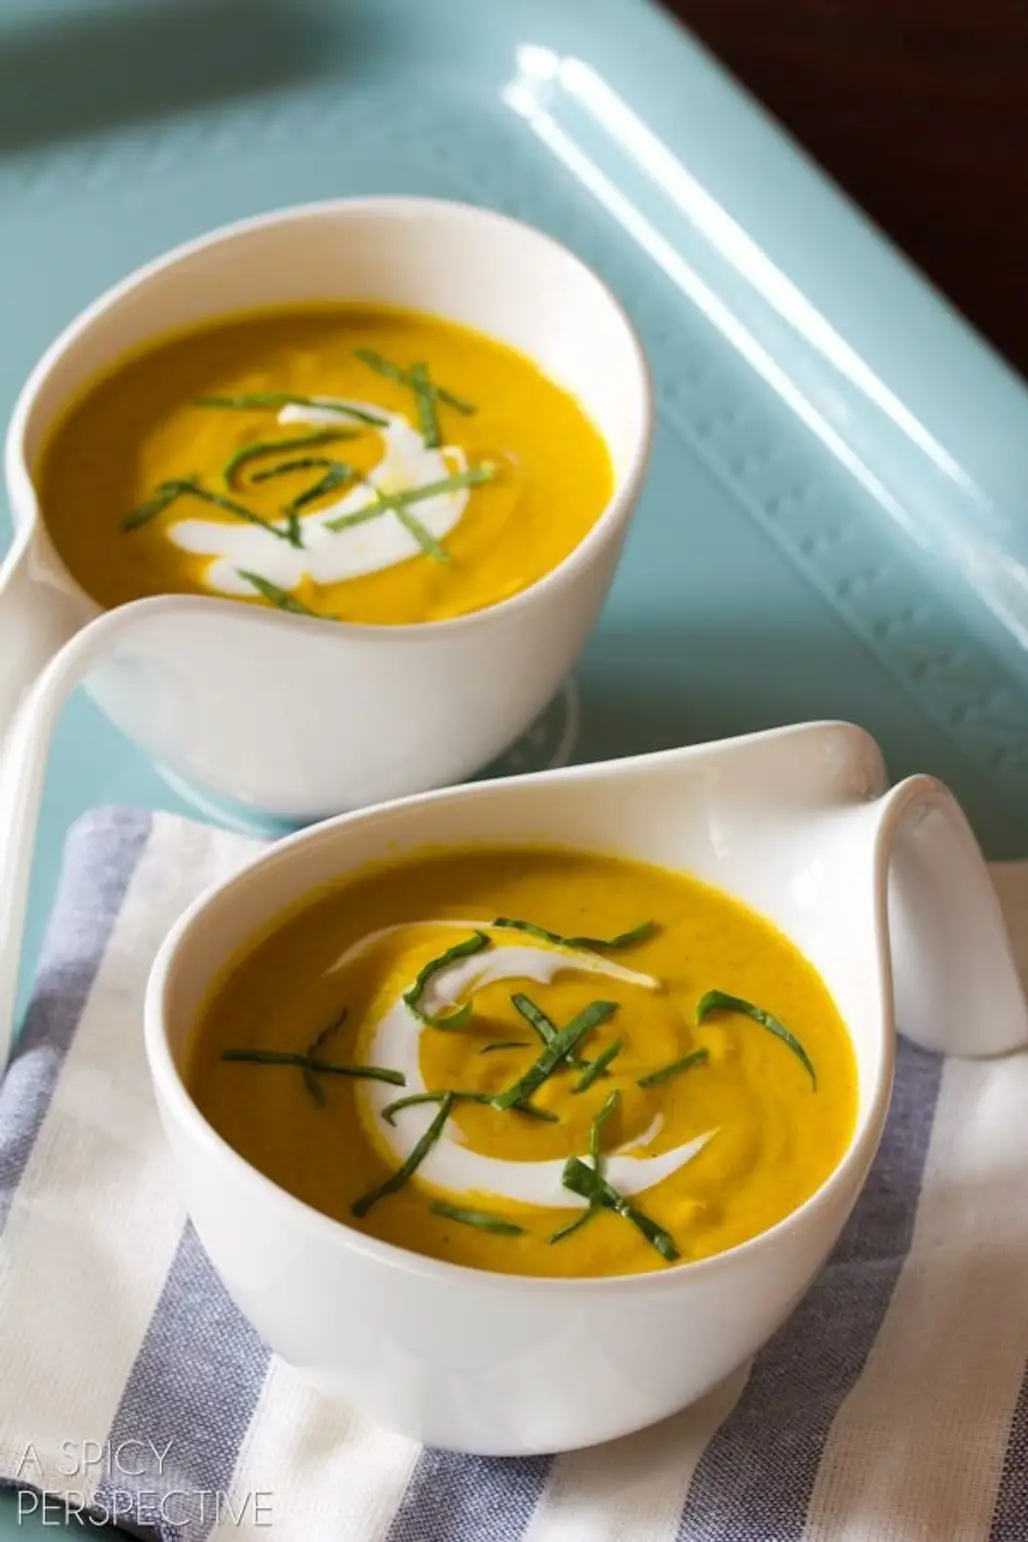 Carrot Soup Recipe with Leeks and Sauvignon Blanc